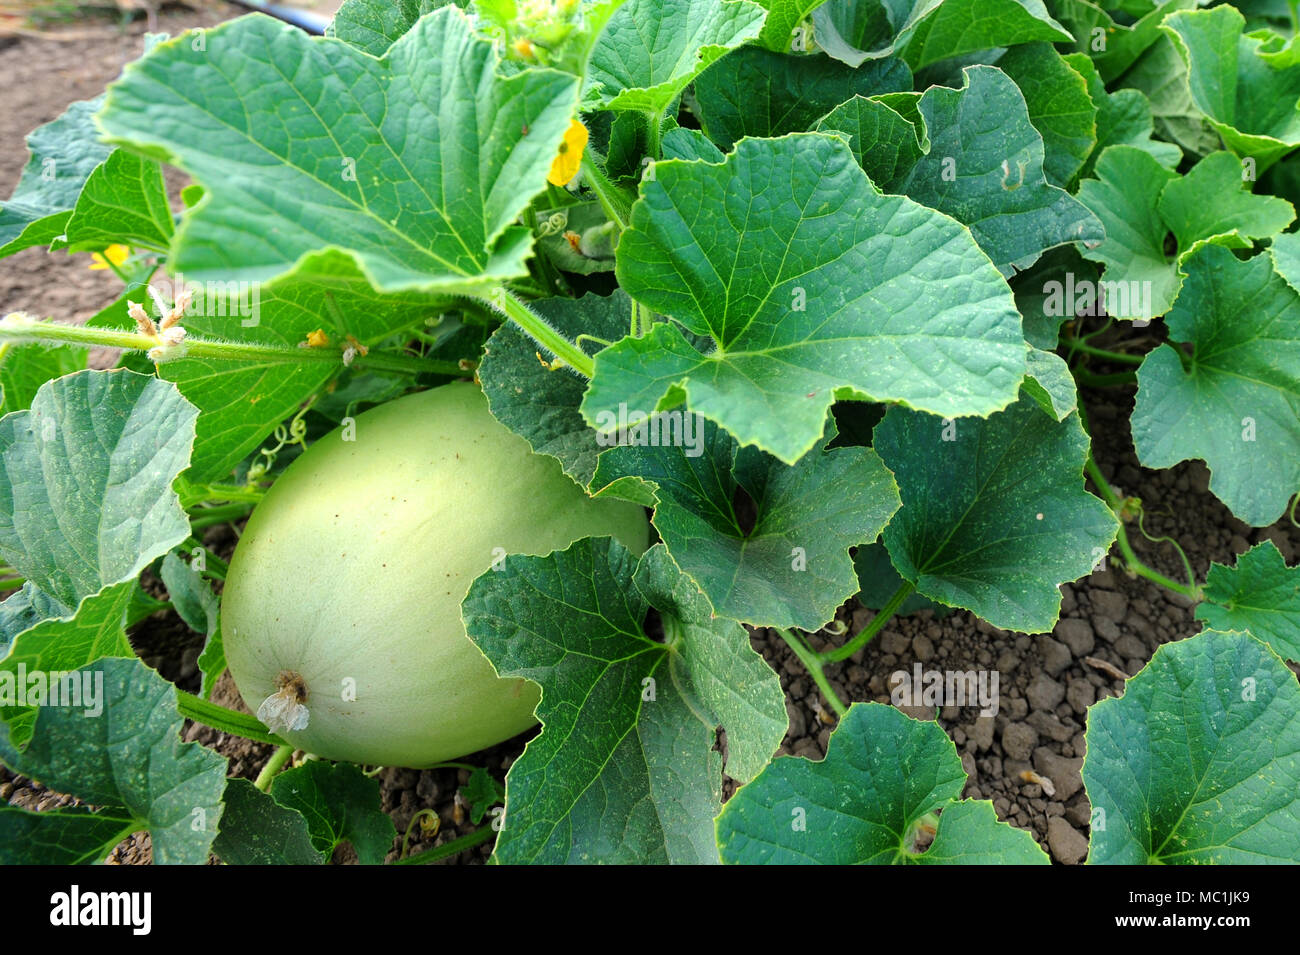 Melons are a popular agricultural crop grown in Capay Valley, California. Stock Photo